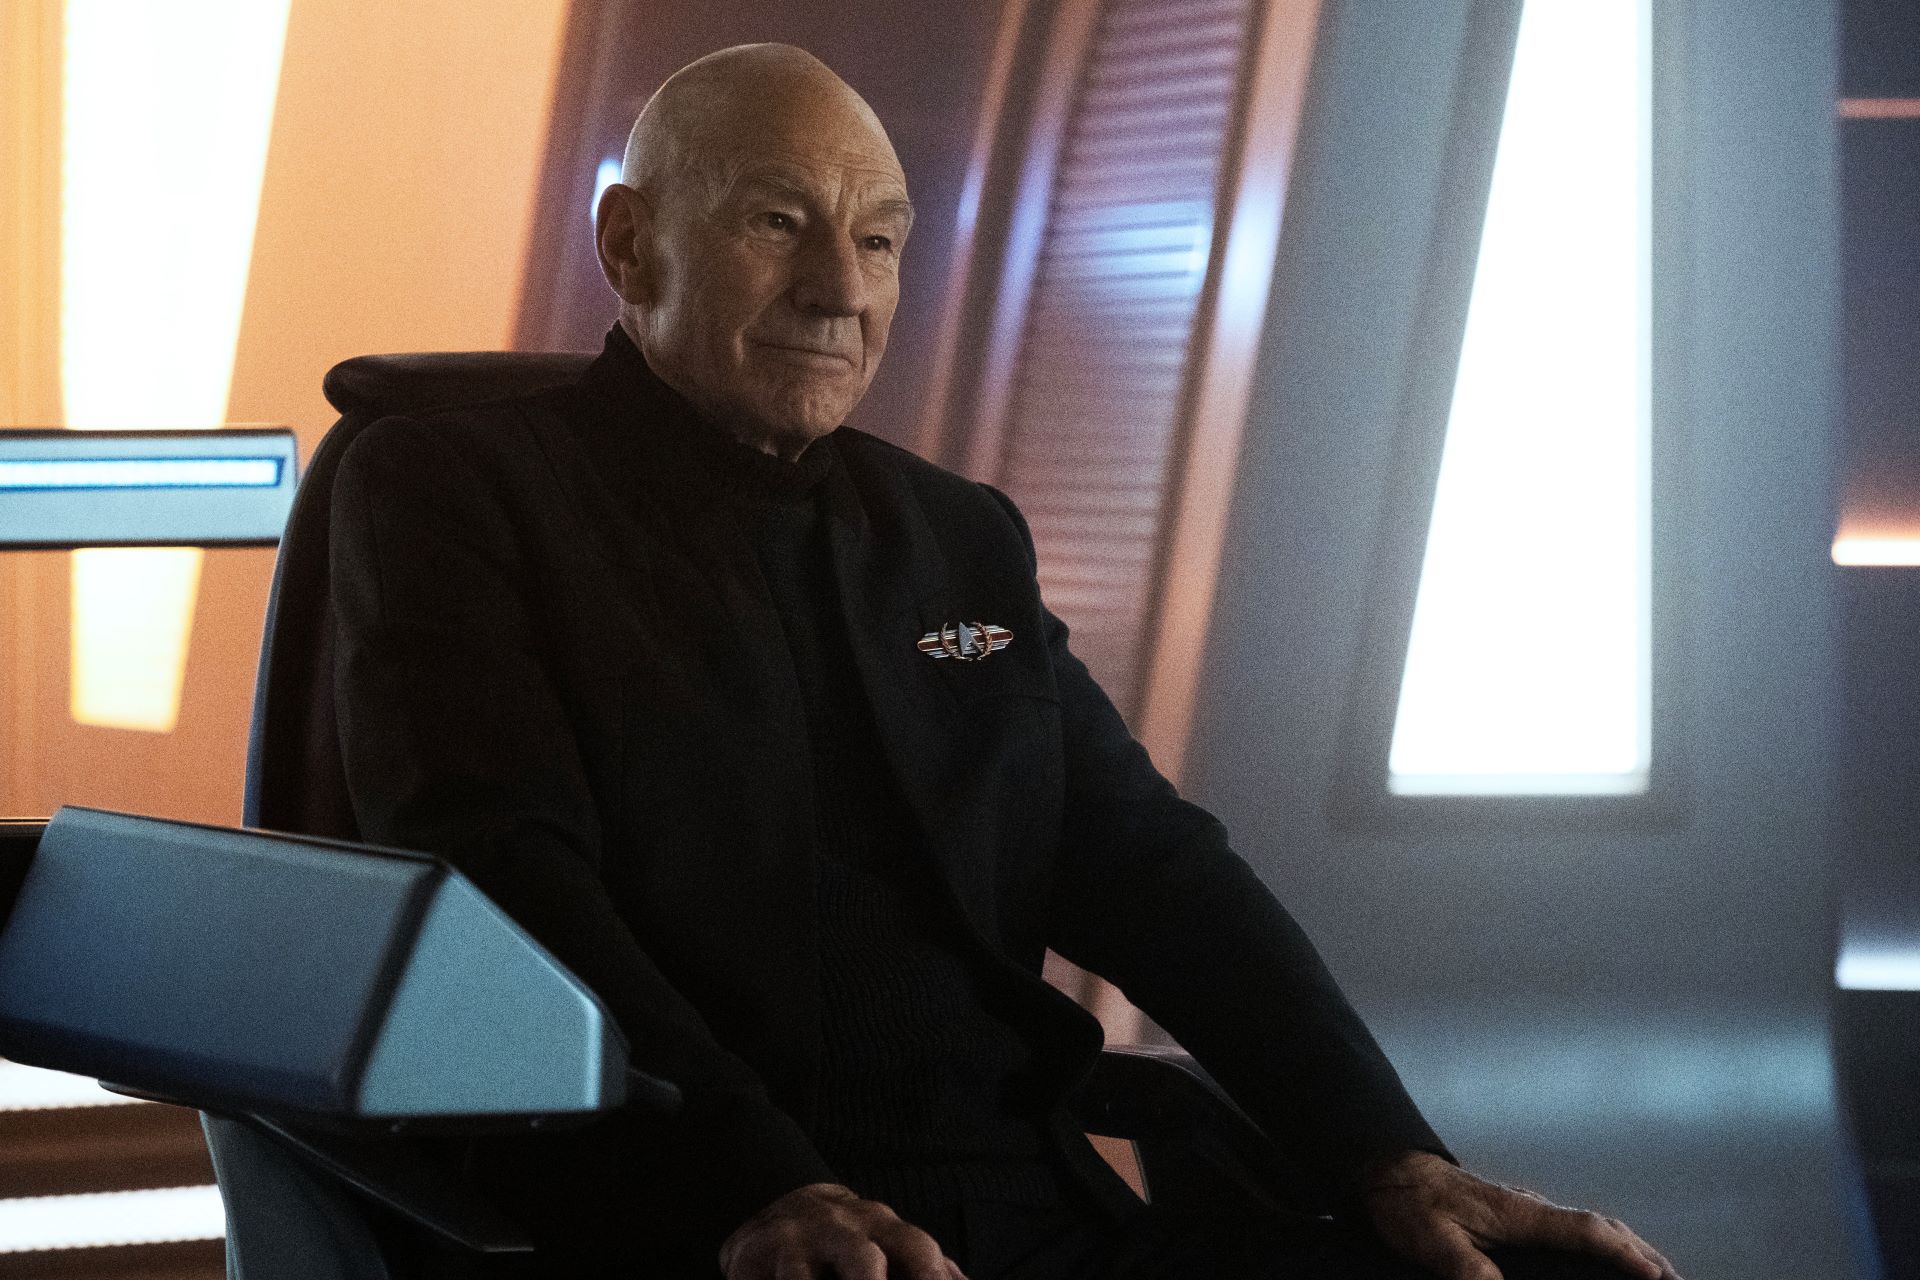 <em>Picard</em> is all about Picard, which sometimes works OK and sometimes does not.